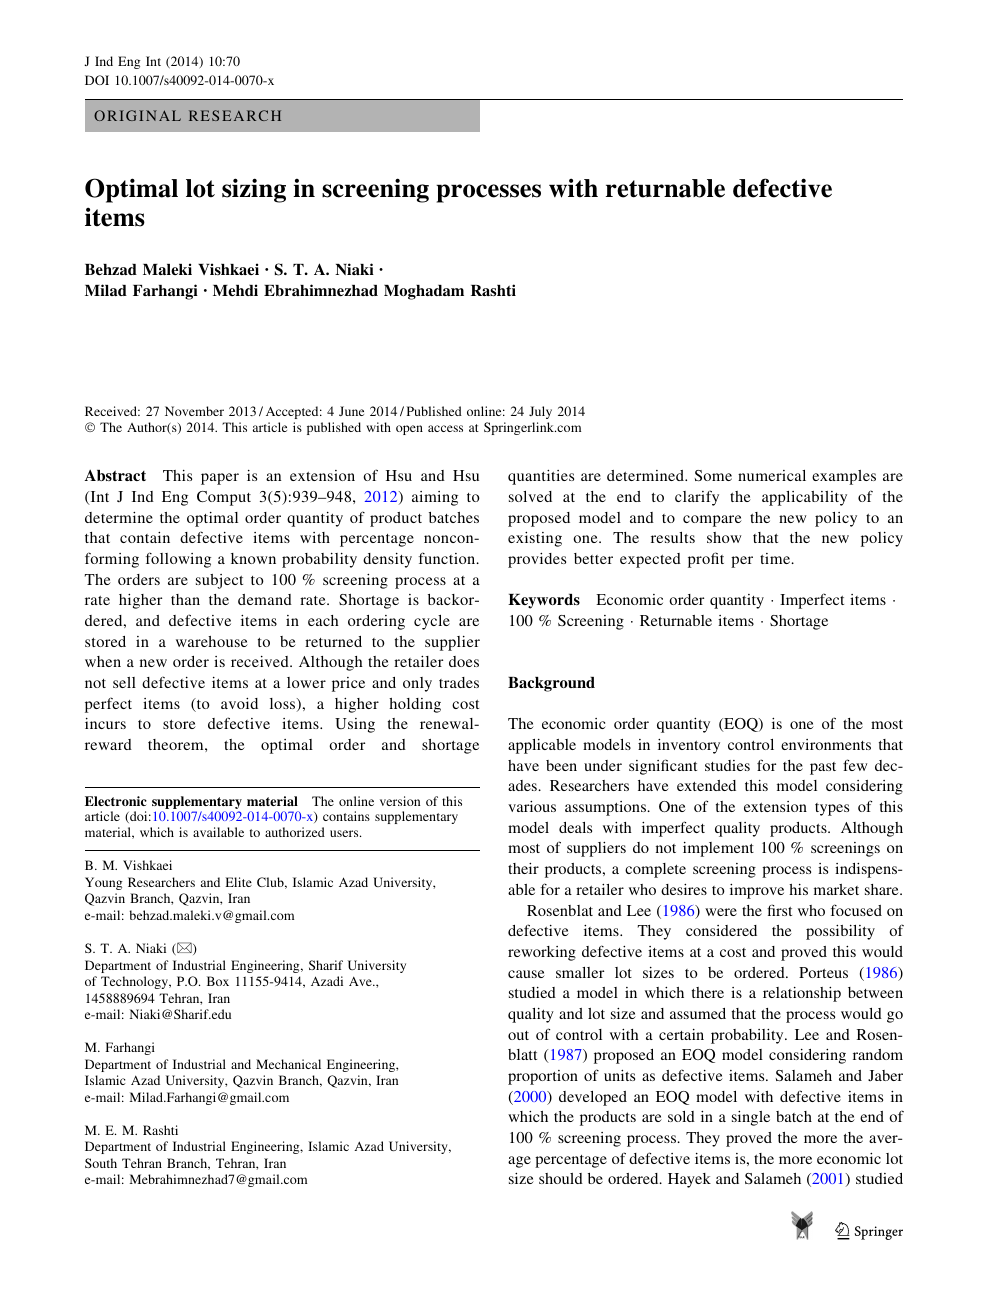 Optimal Lot Sizing In Screening Processes With Returnable Defective Items Topic Of Research Paper In Mathematics Download Scholarly Article Pdf And Read For Free On Cyberleninka Open Science Hub